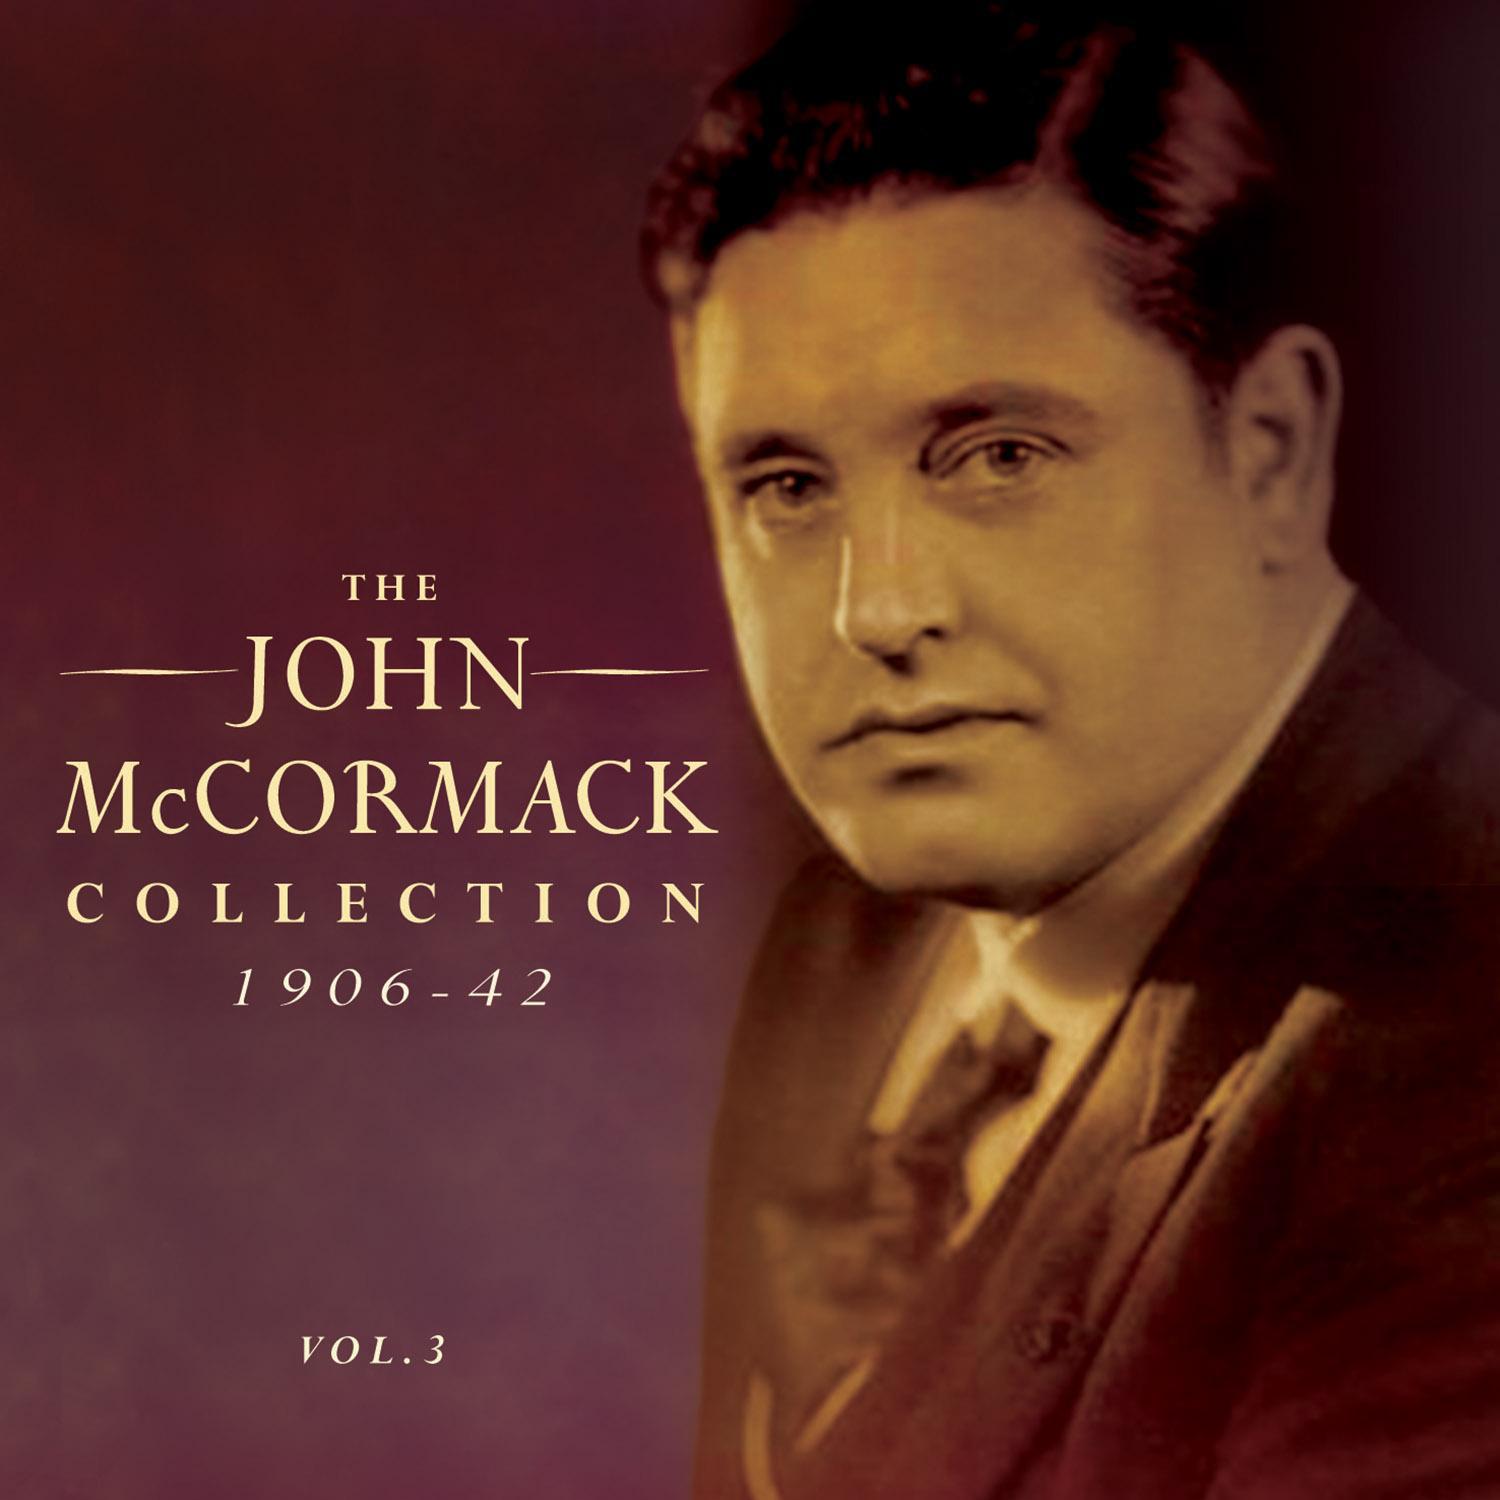 The John Mccormack Collection 1906-42, Vol. 3